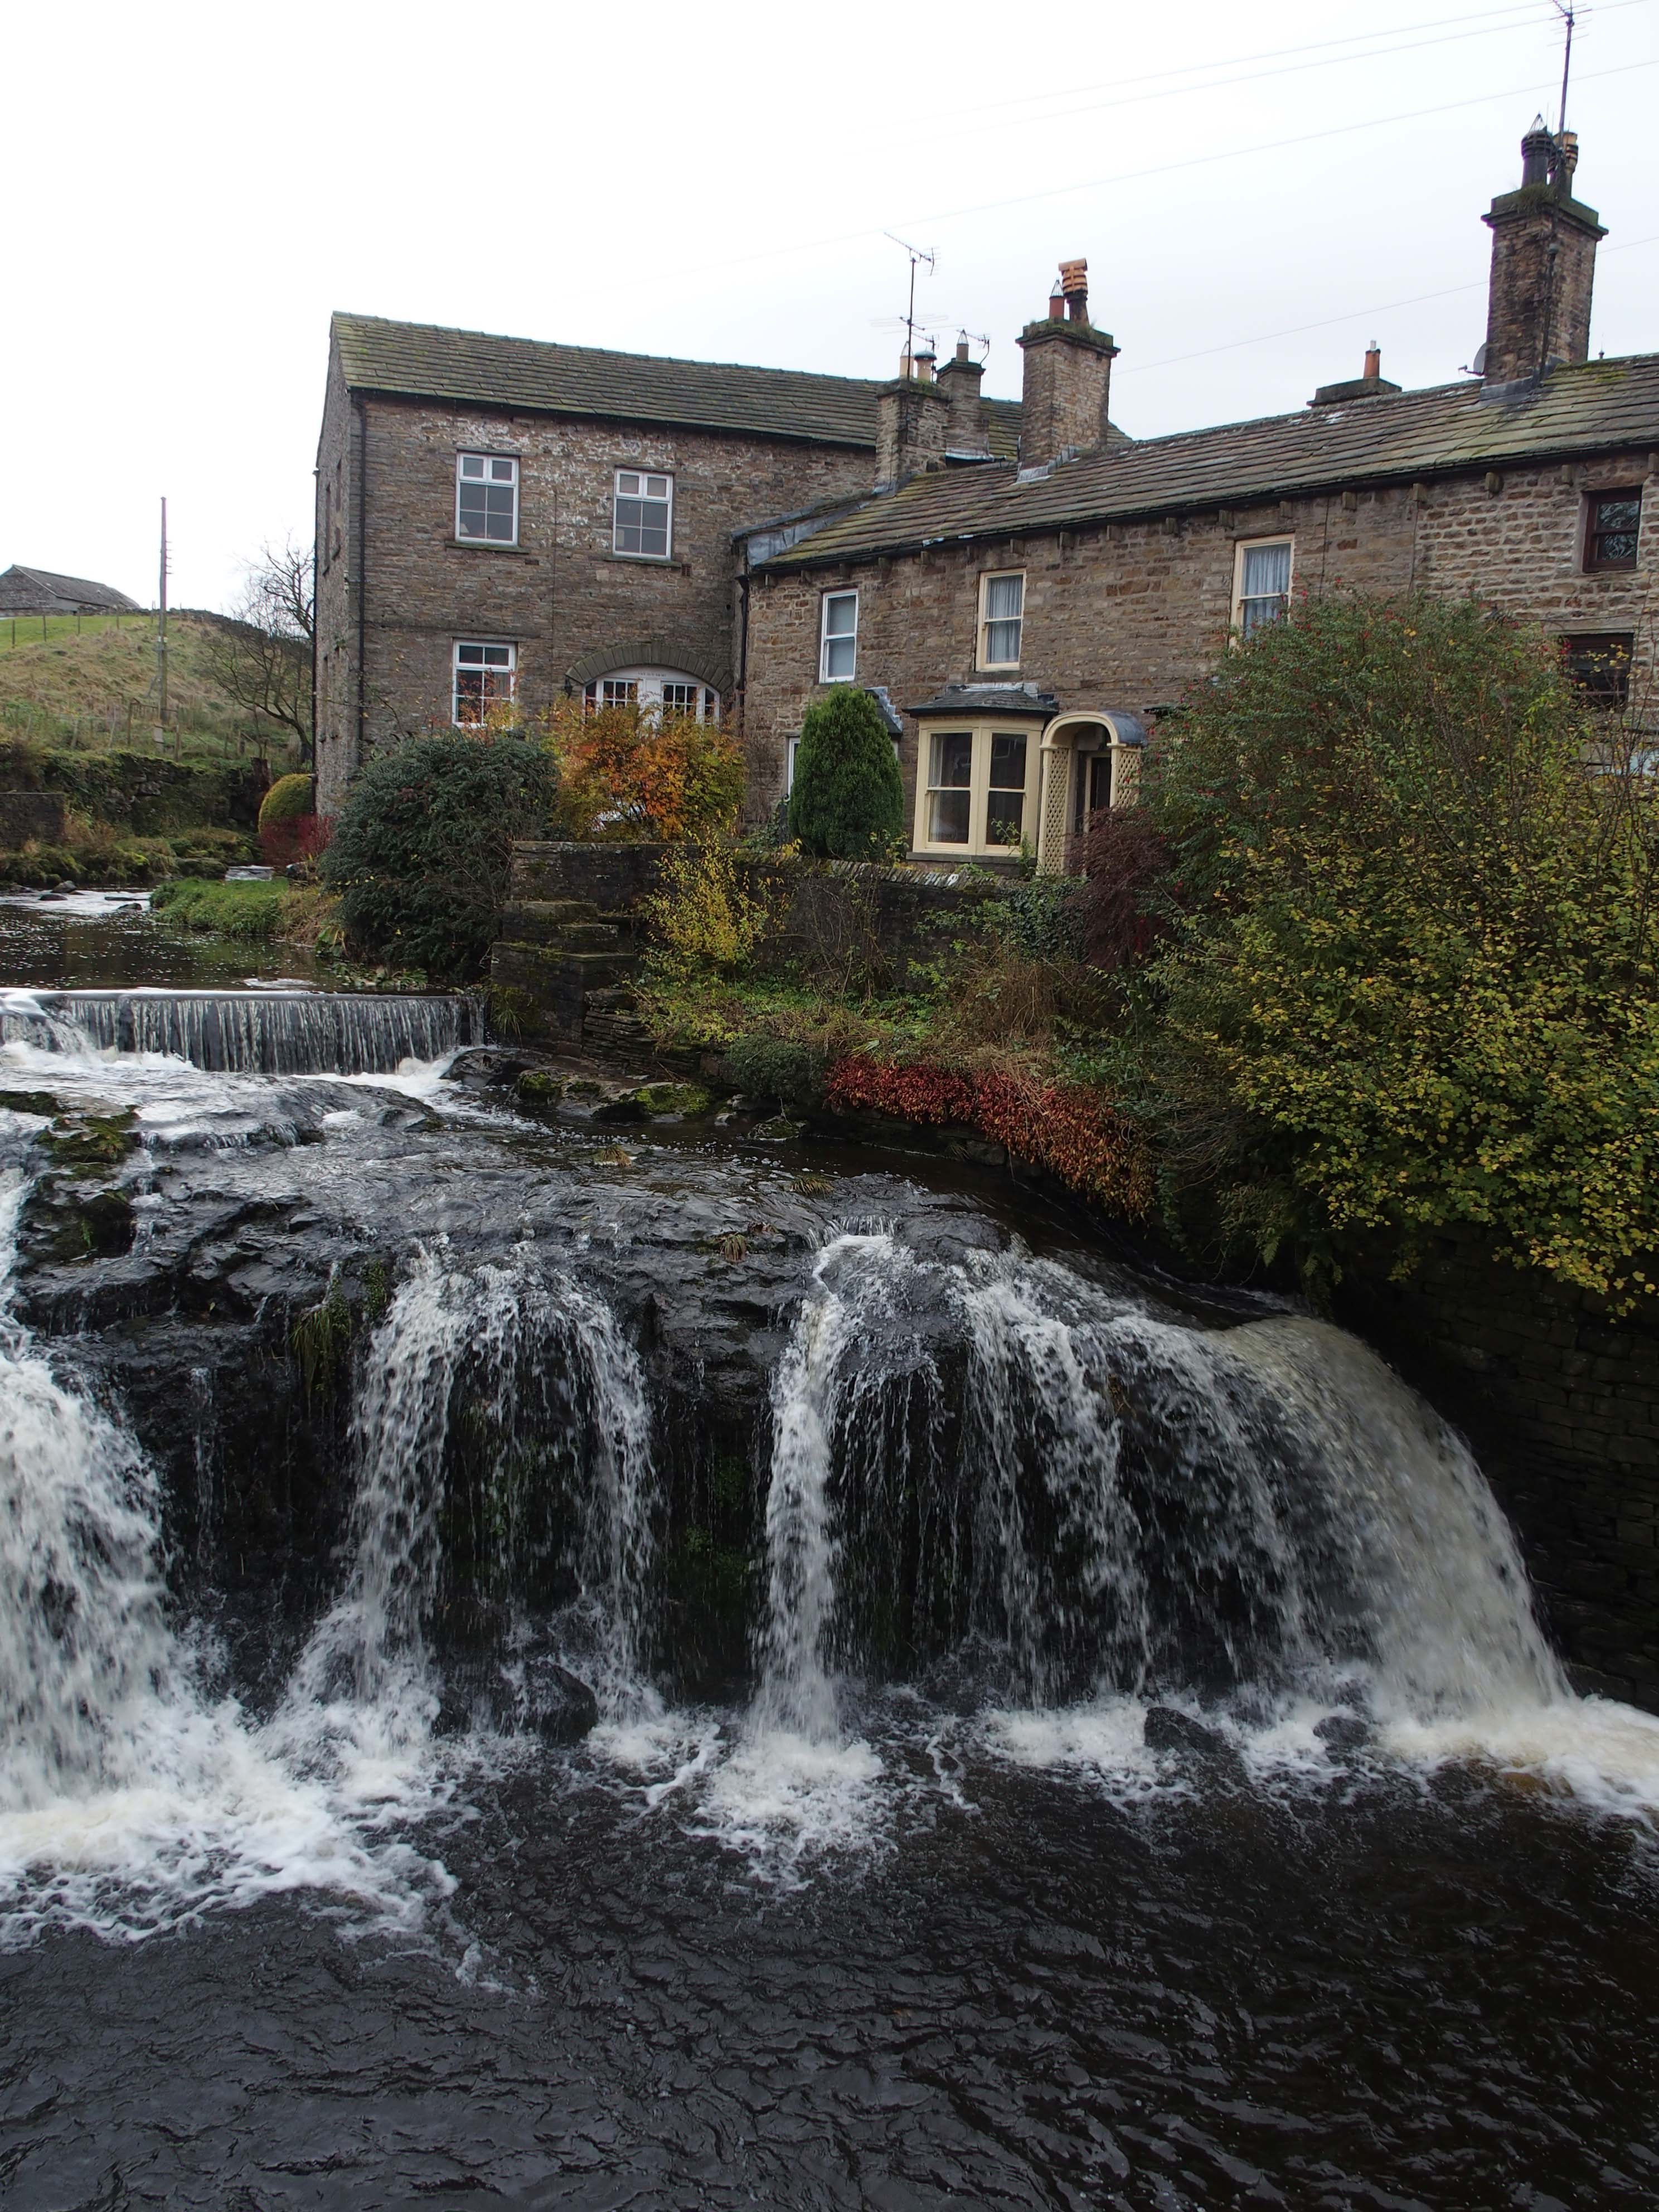 The village of Hawes